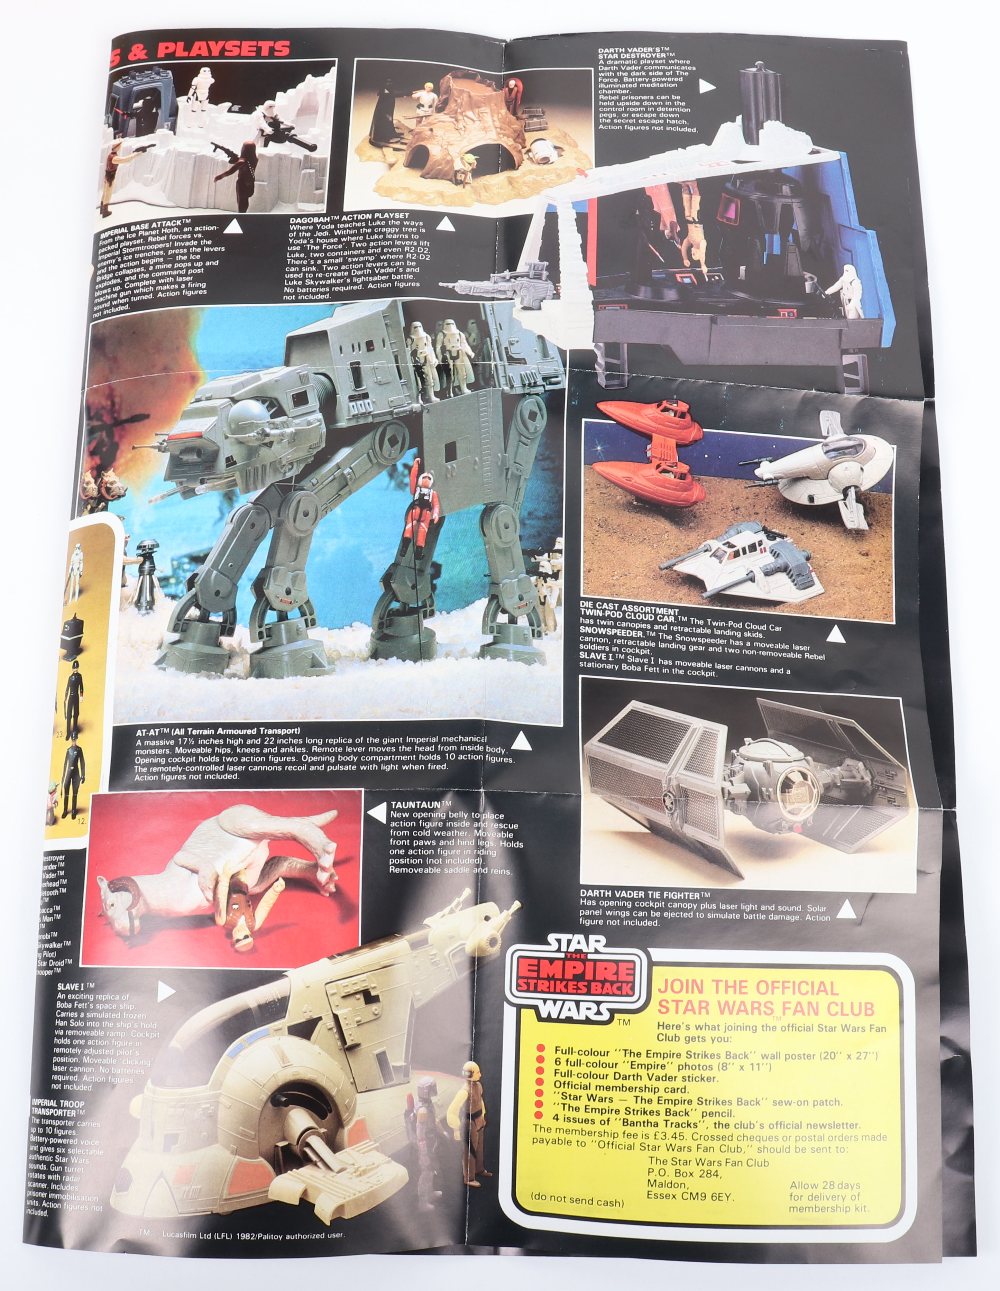 Boxed Palitoy Star Wars The Empire Strikes Back Dagobah Action Playset - Image 7 of 13